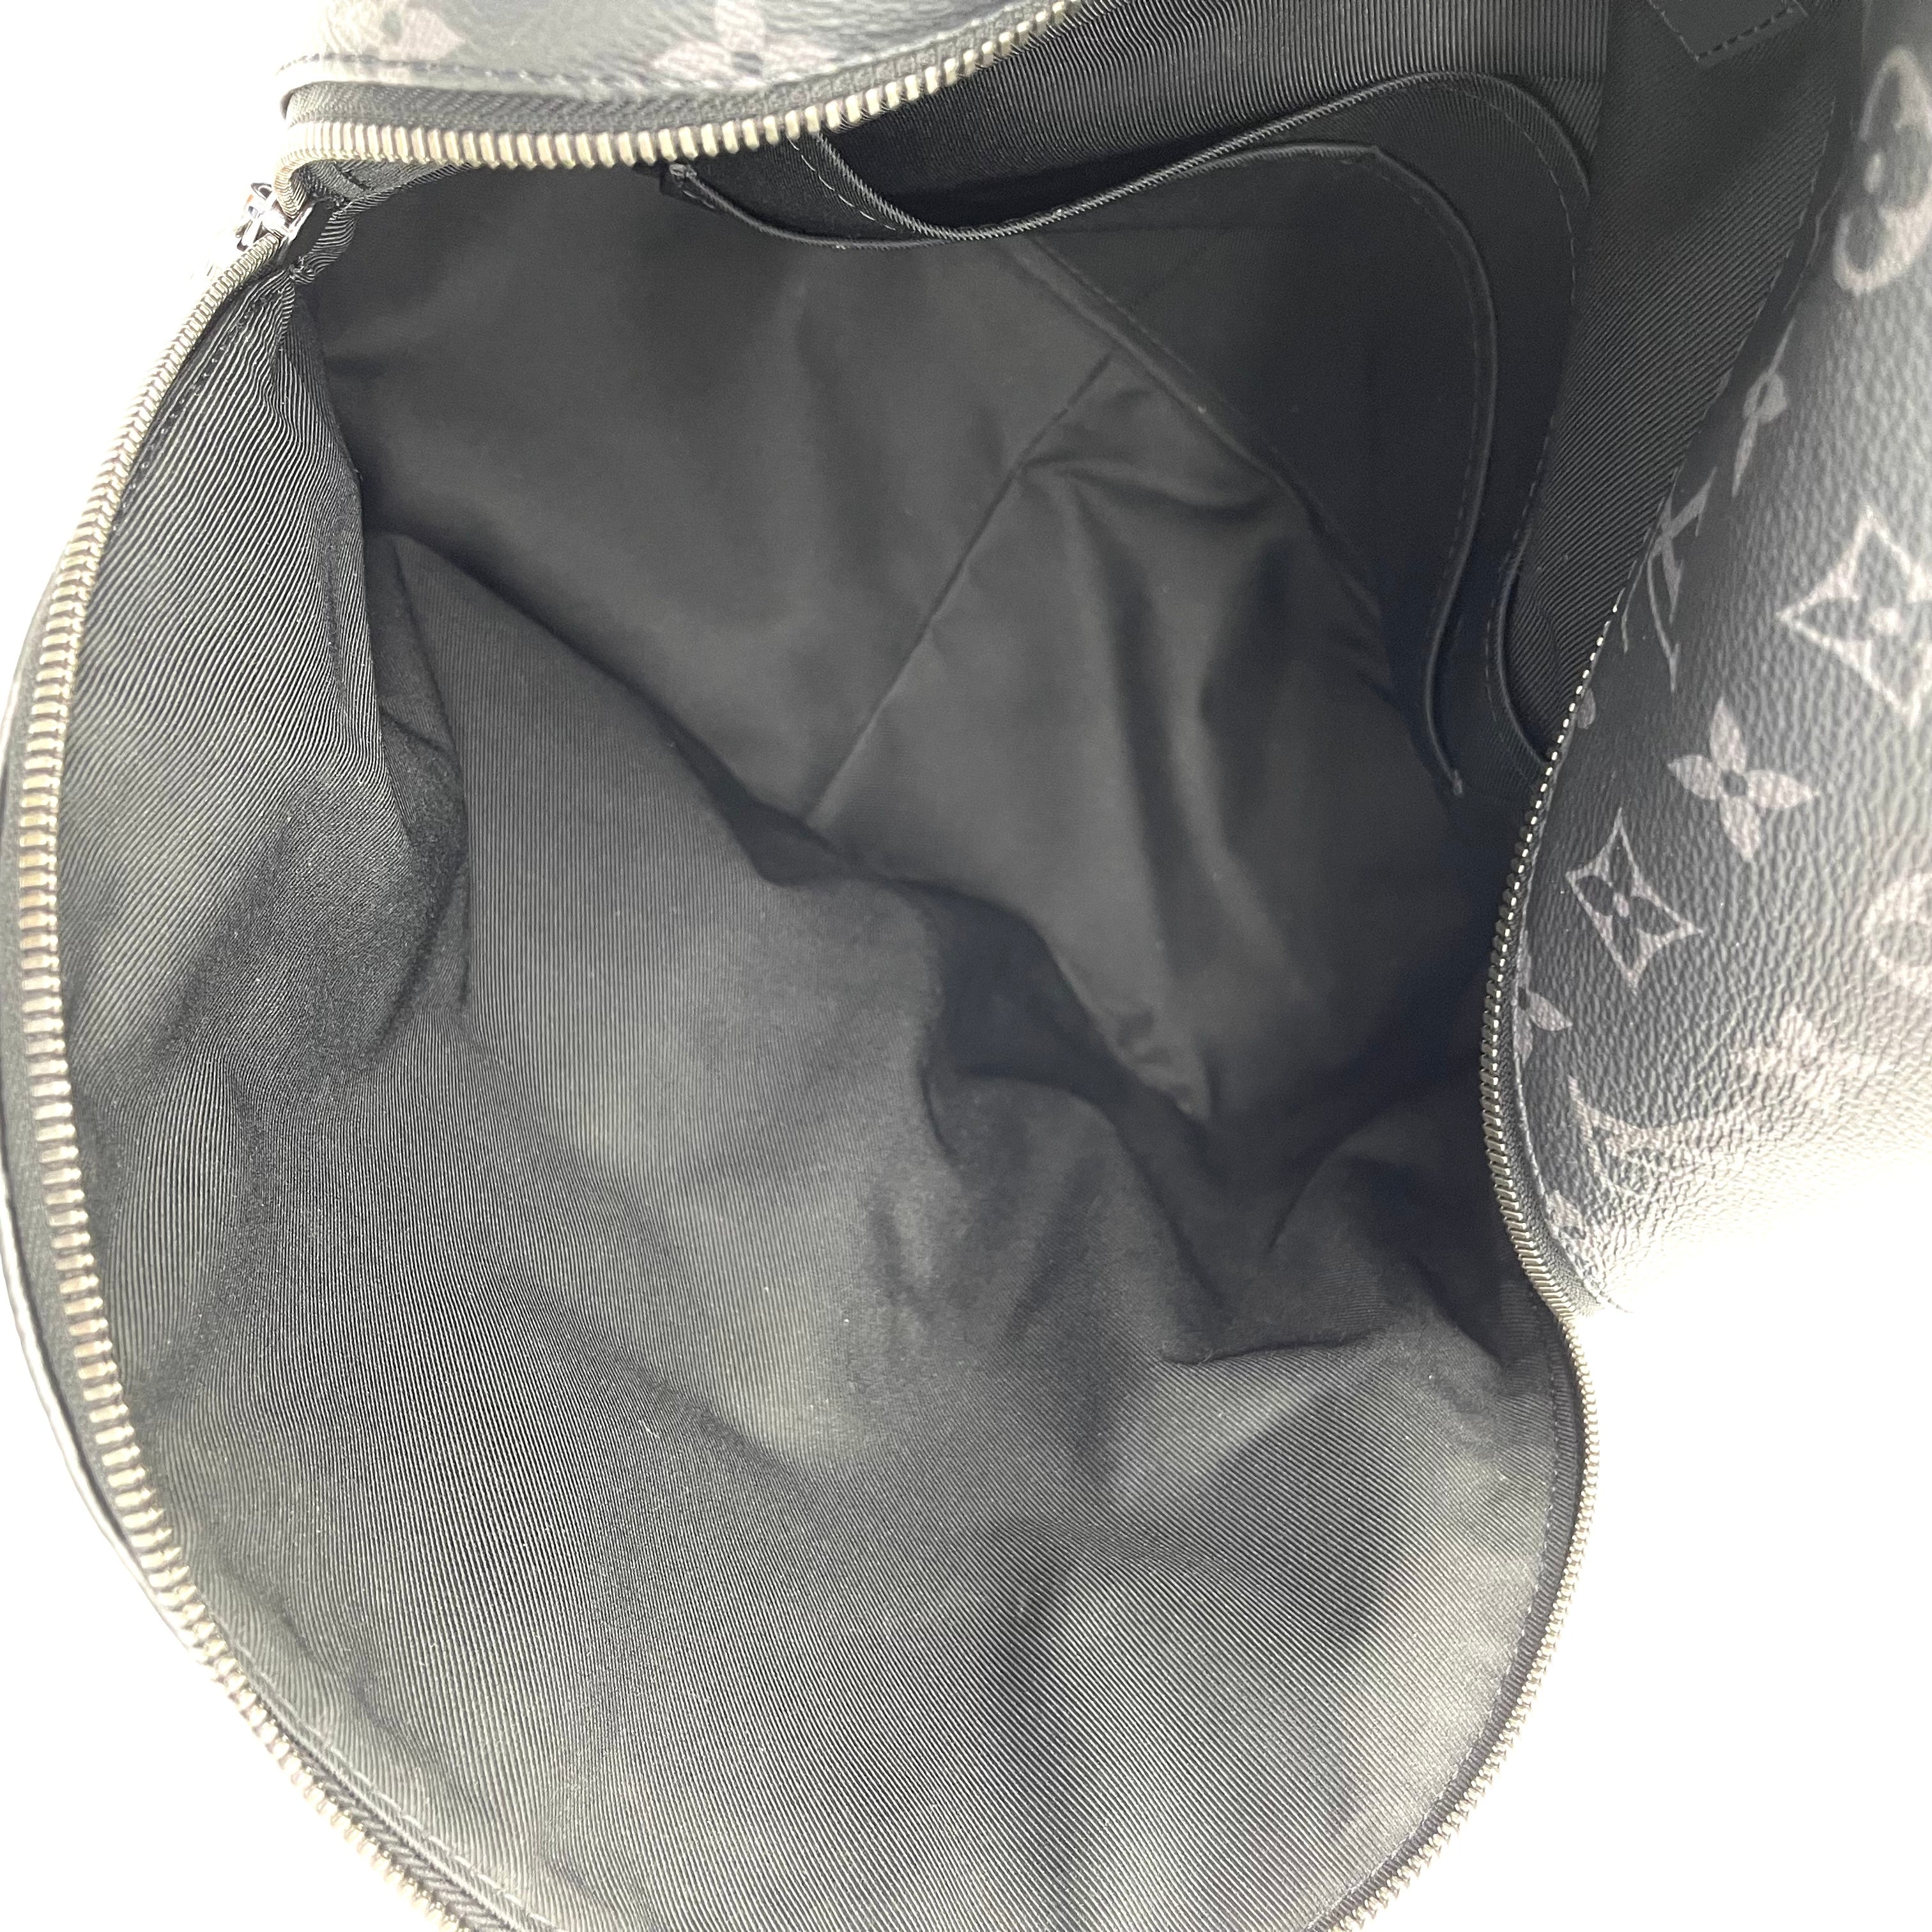 Louis Vuitton Silver Monogram Discovery Backpack